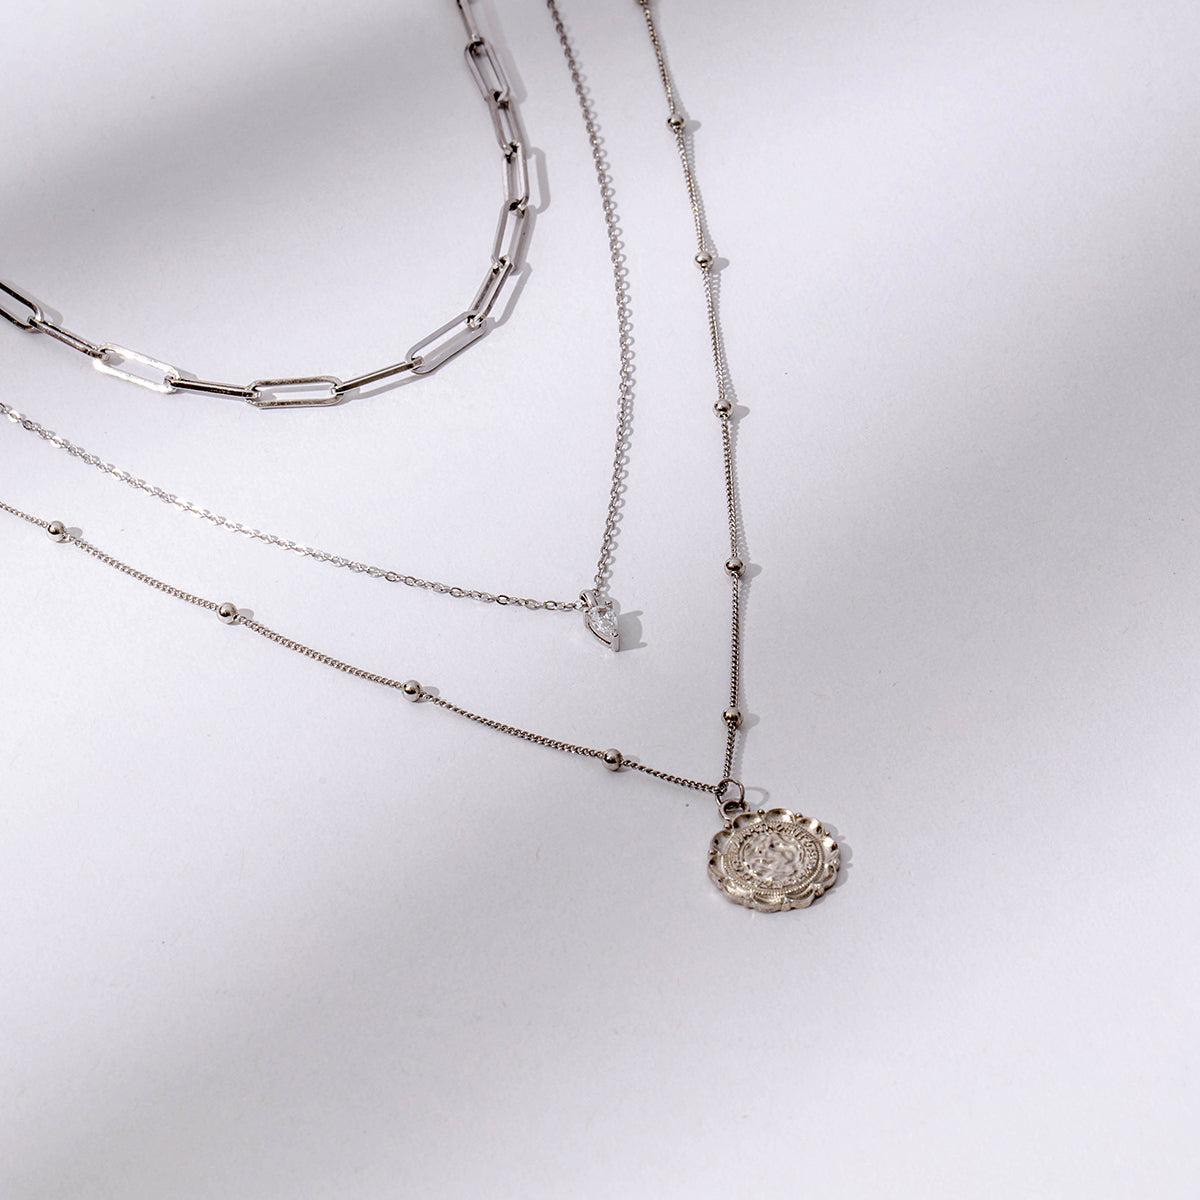 Sterling Silver Layering Necklace Collection, 5 Styles